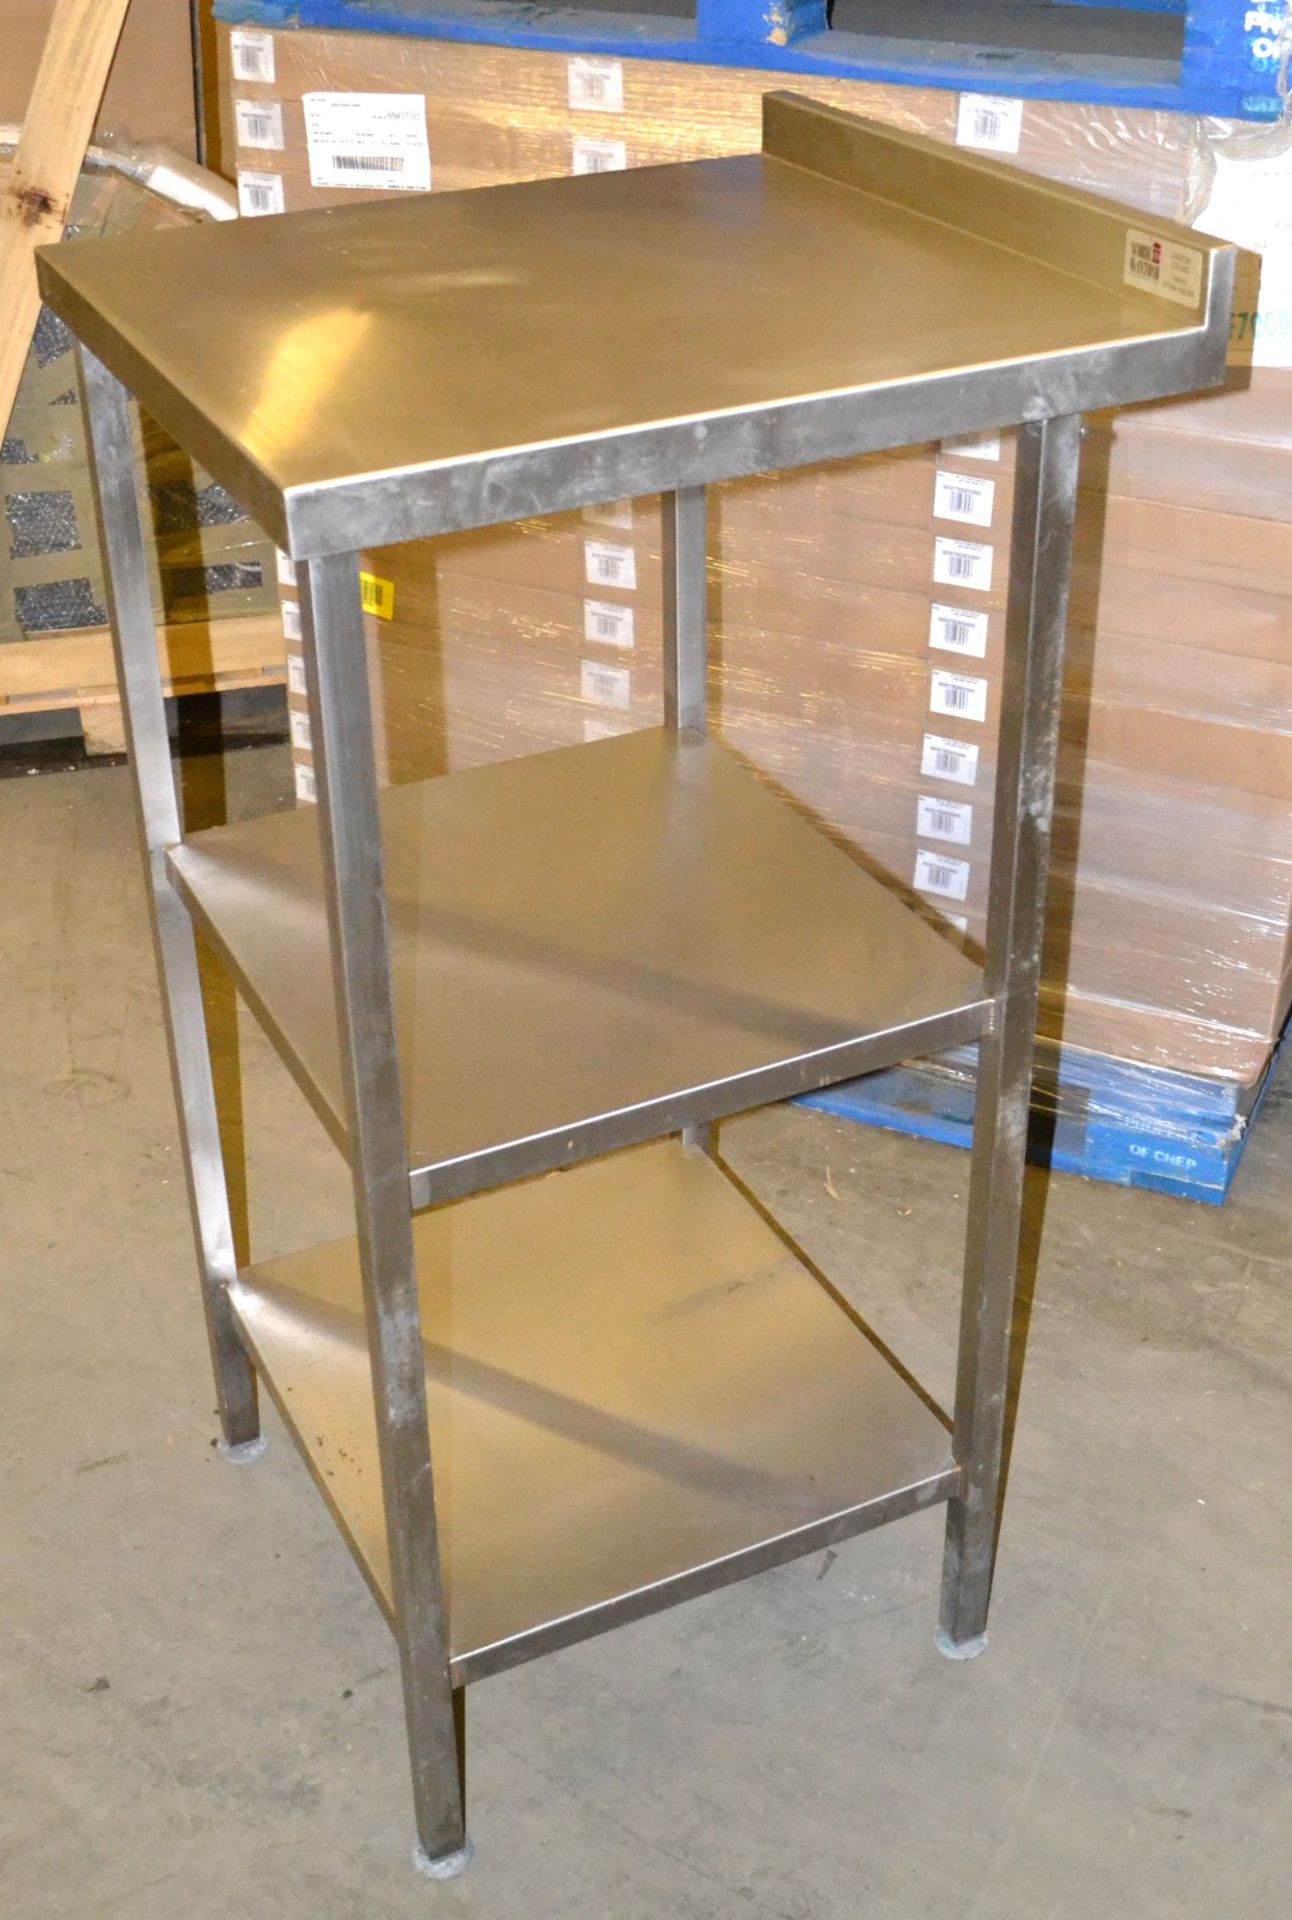 1 x Tall Stainless Steel Scobie McIntosh Prep Table - Dimensions: 60 x 65 x 124cm - Ref: MC115 - CL2 - Image 5 of 8